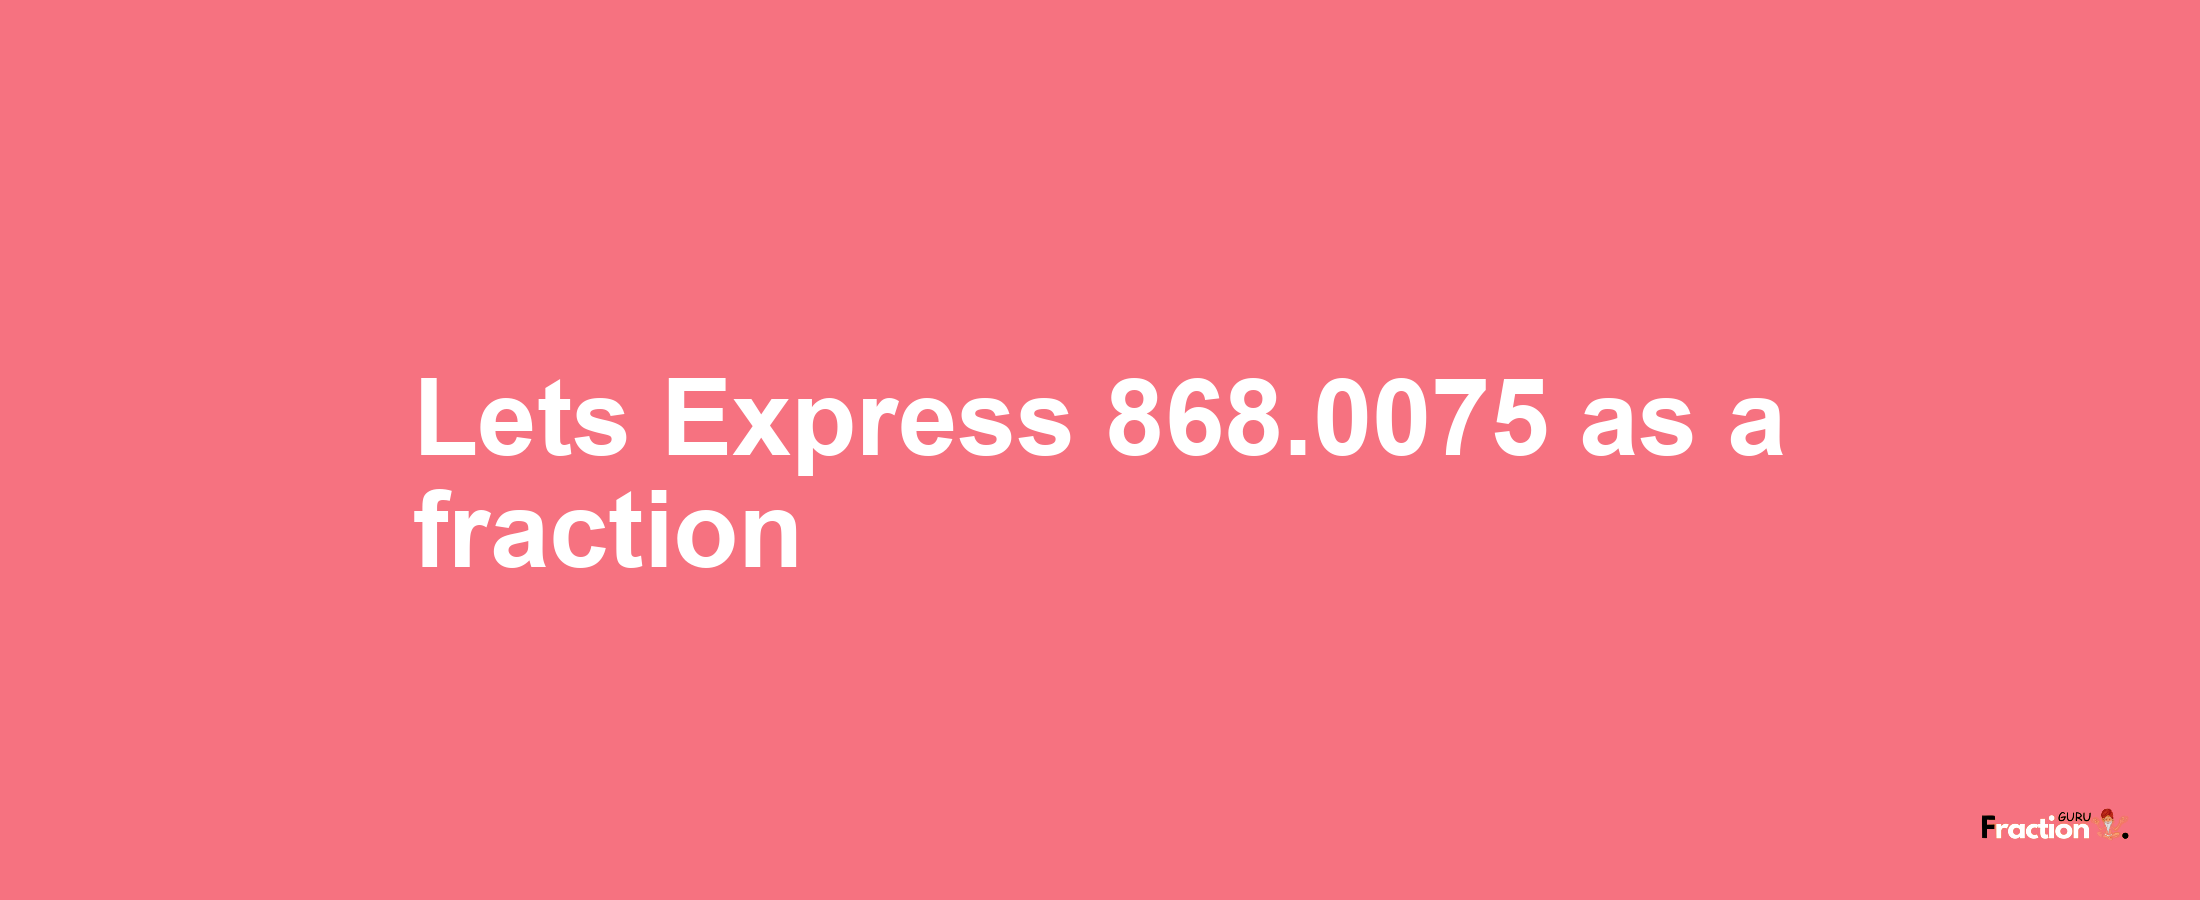 Lets Express 868.0075 as afraction